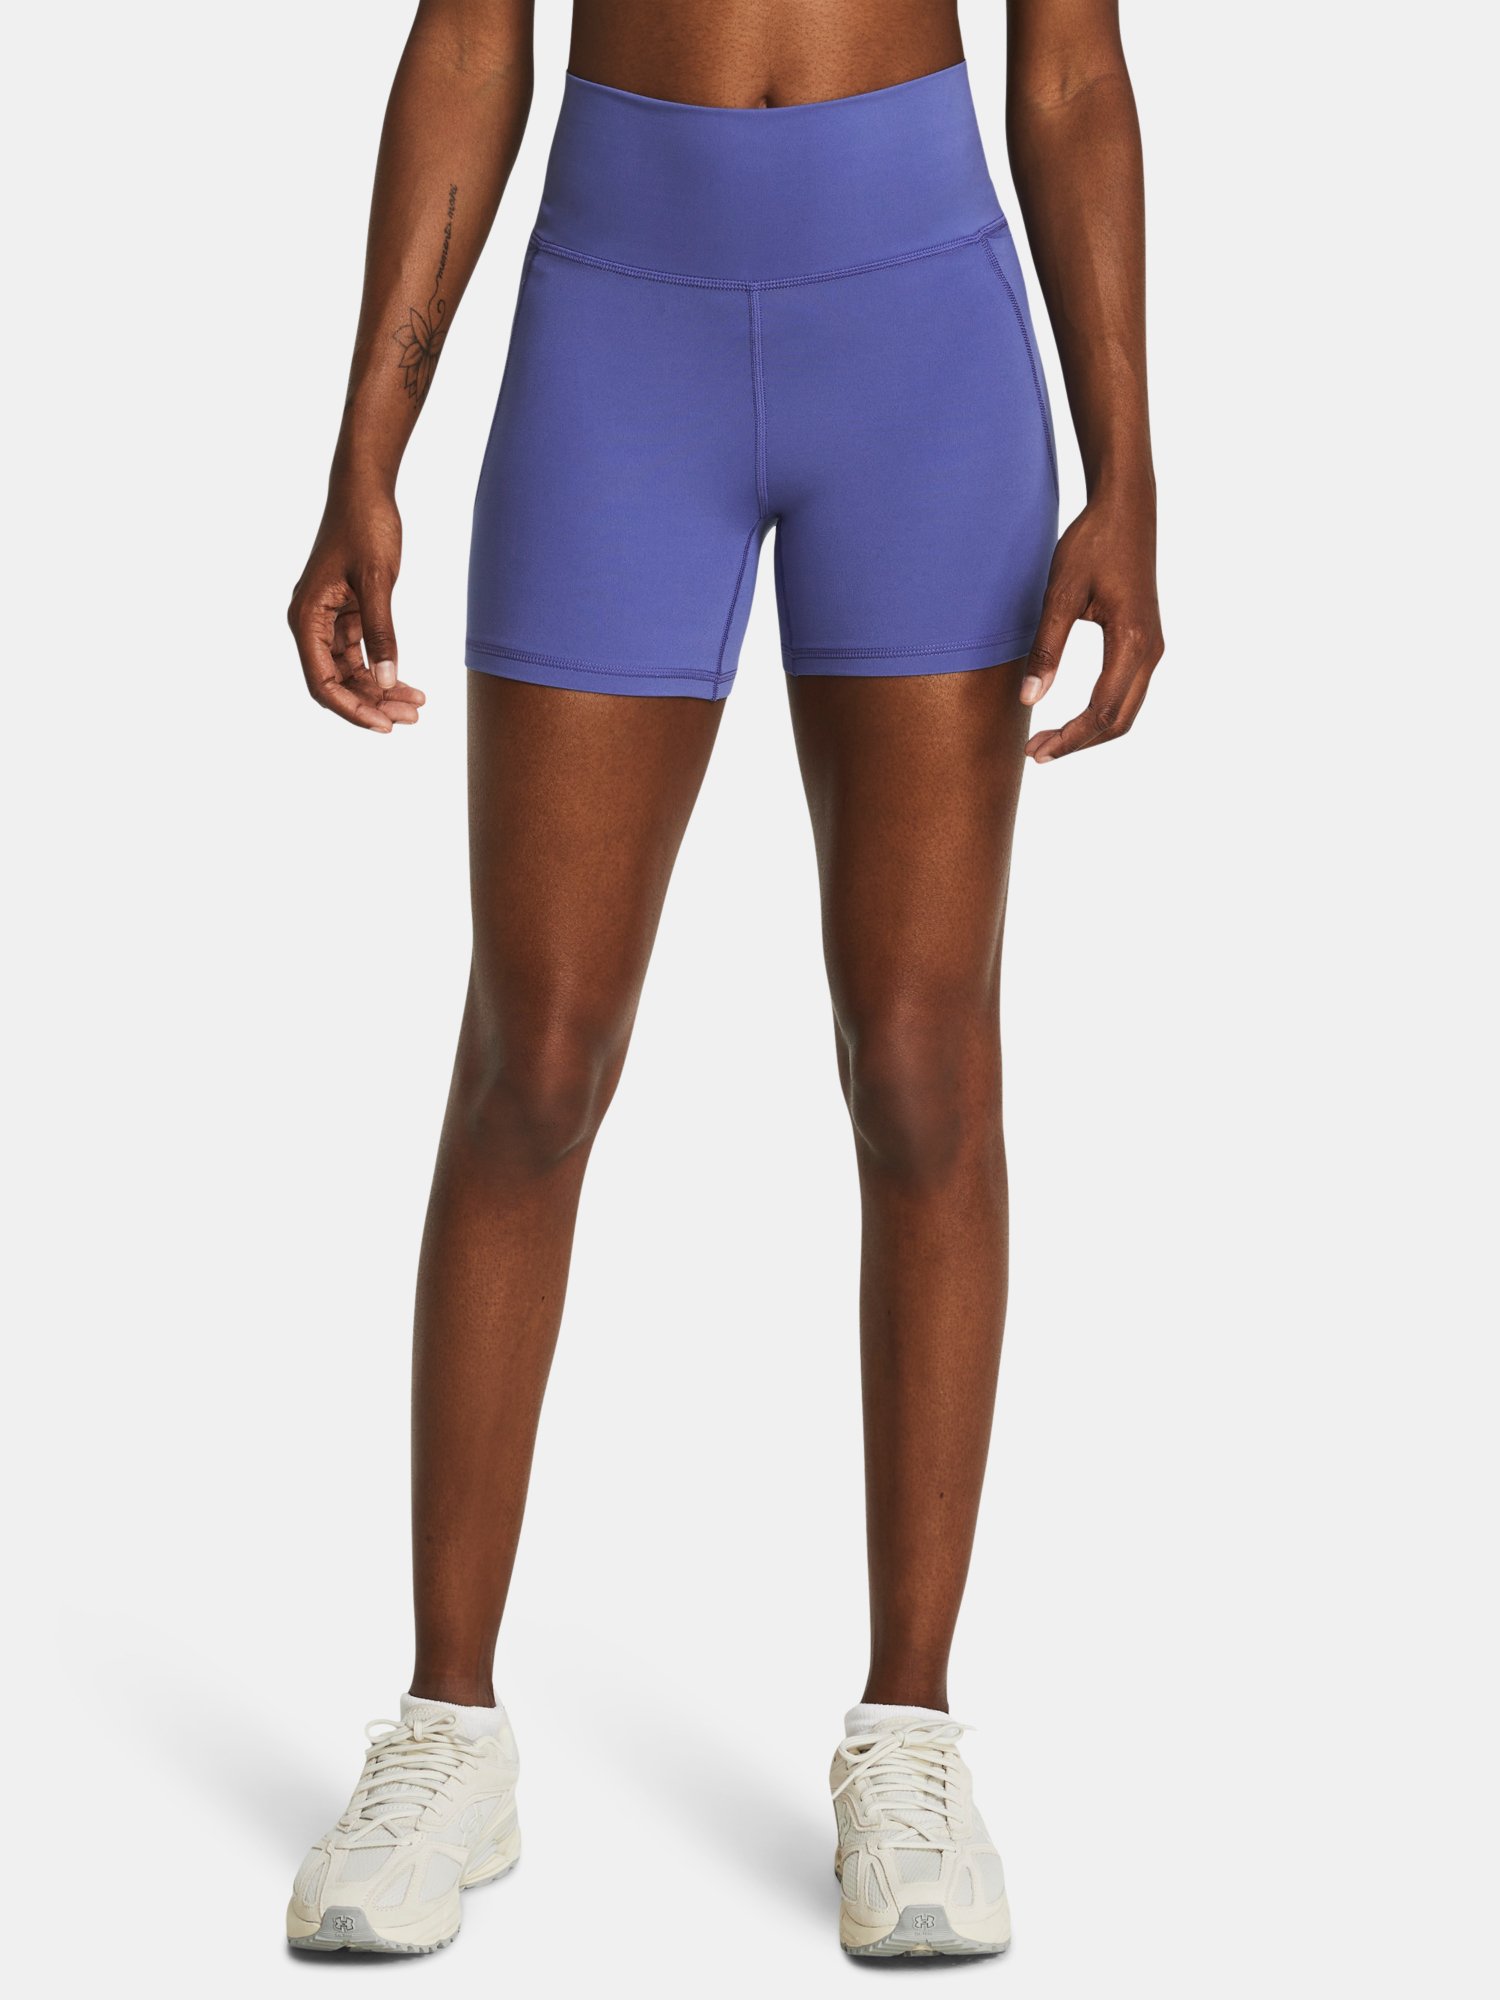 Under Armour Meridian Middy-PPL Shorts - Women